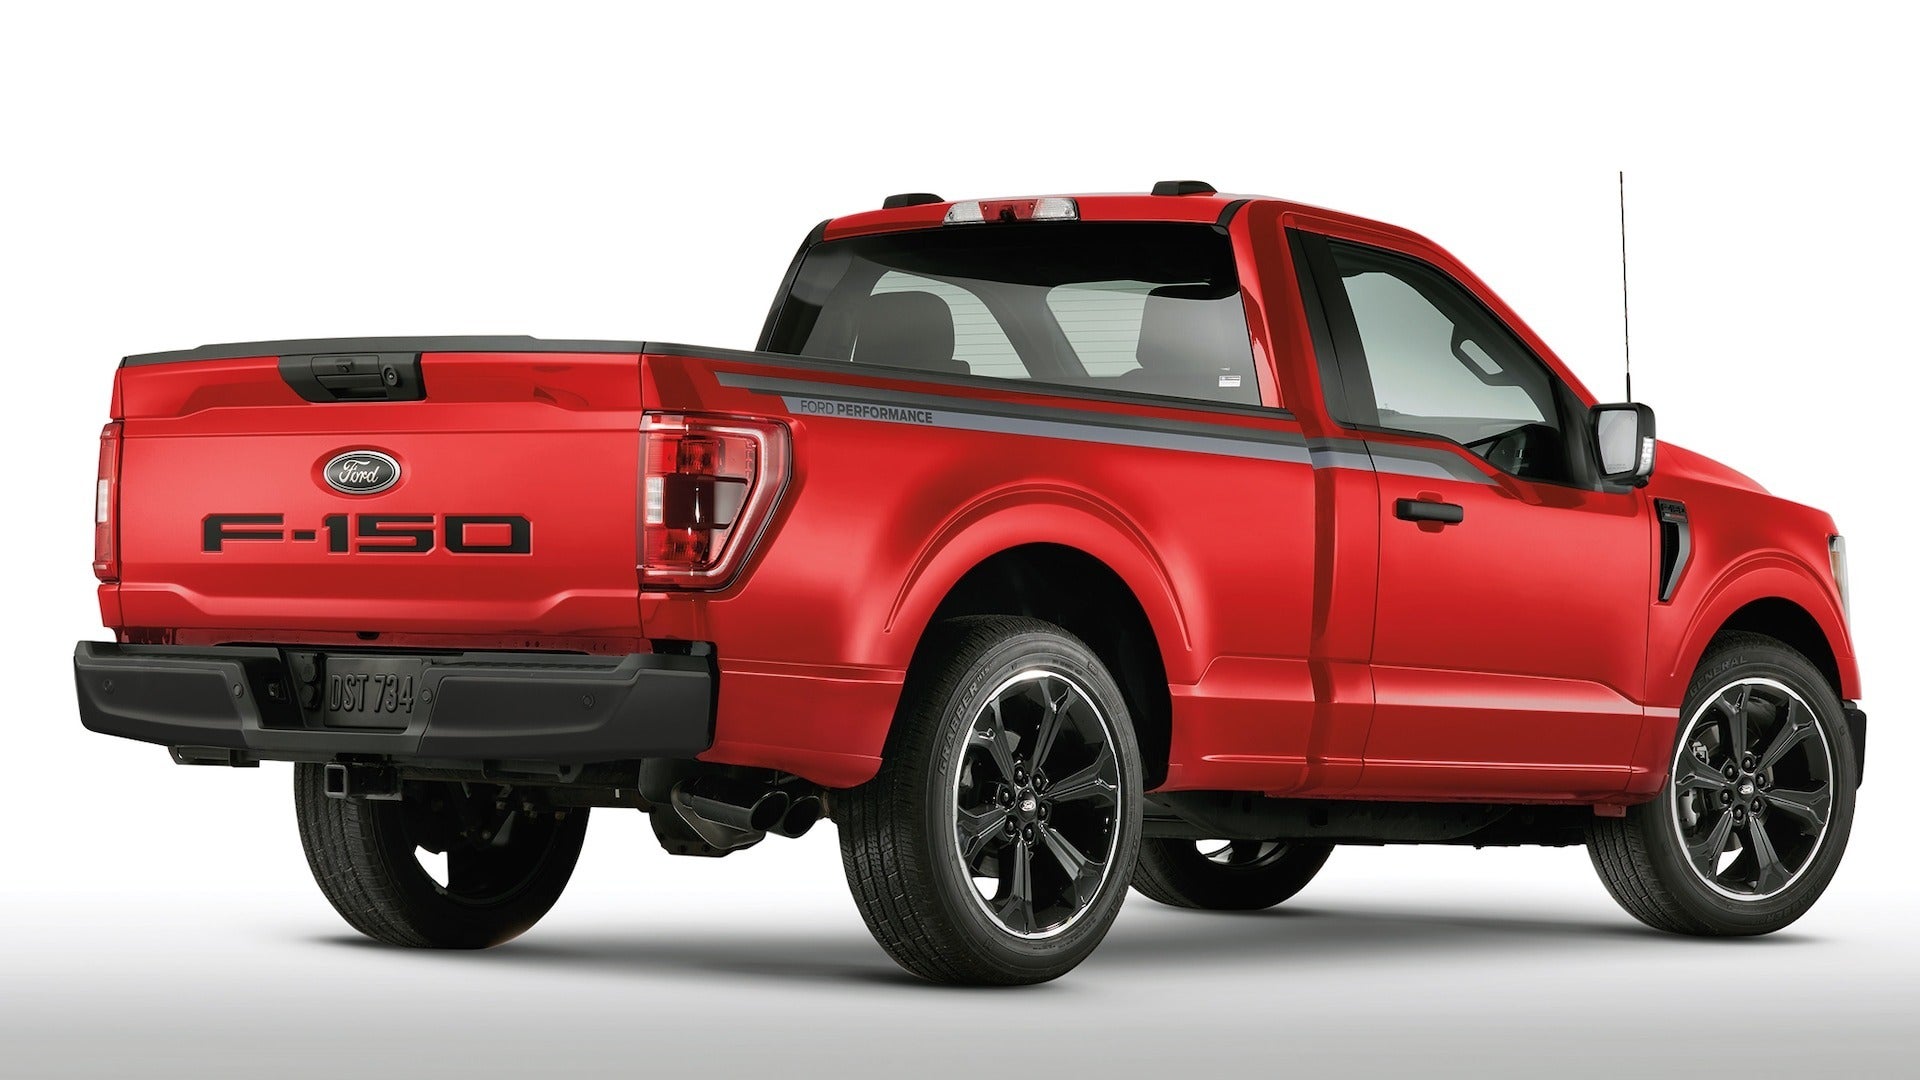 Ford Will Debut a Lowered Street F-150 Pickup: Report